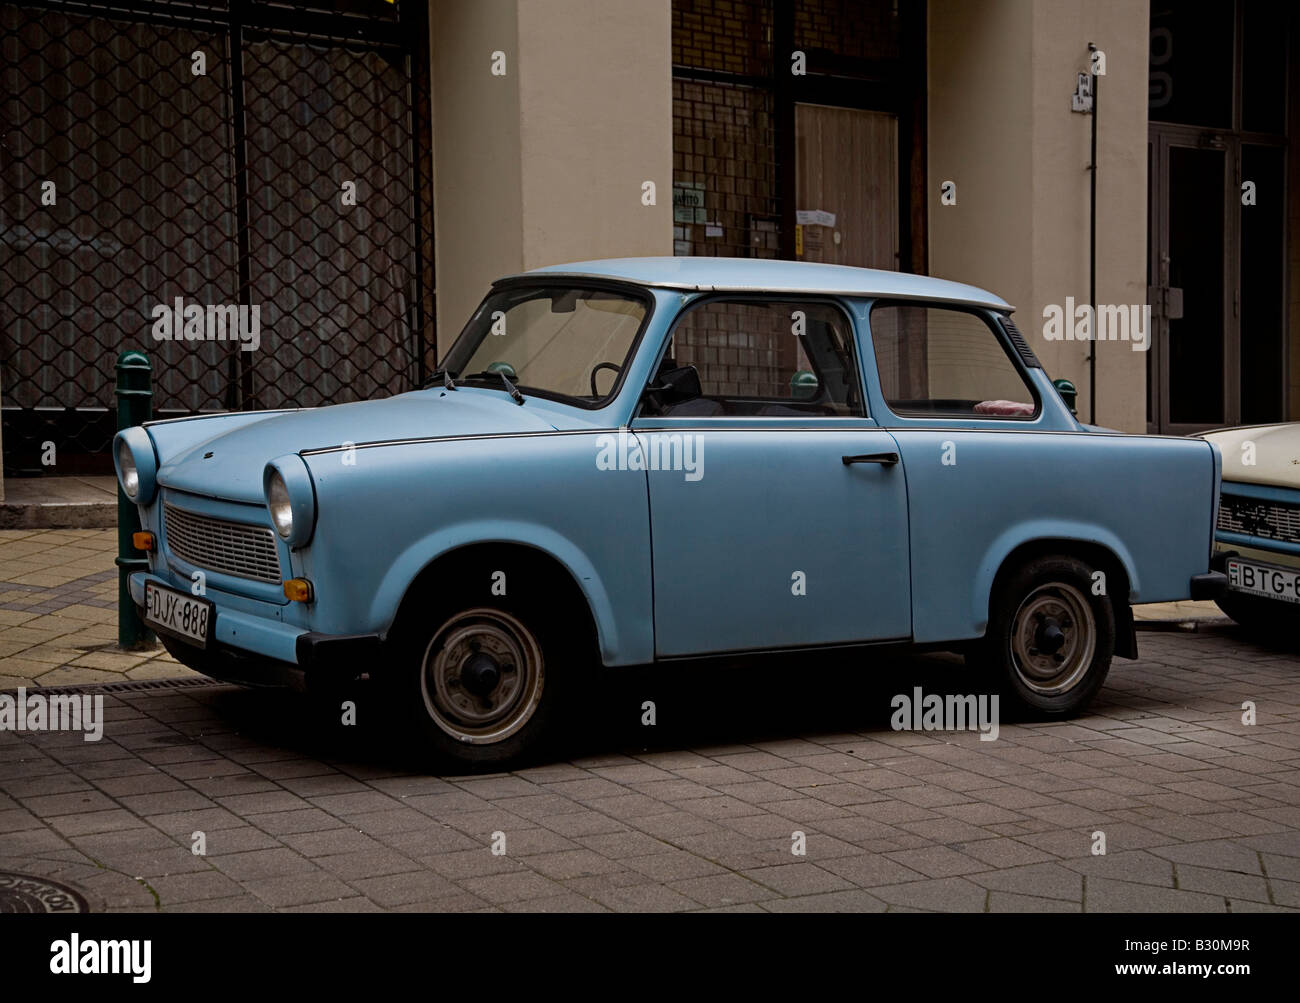 Trabant Car parked on a street in Budapest Hungary Stock Photo